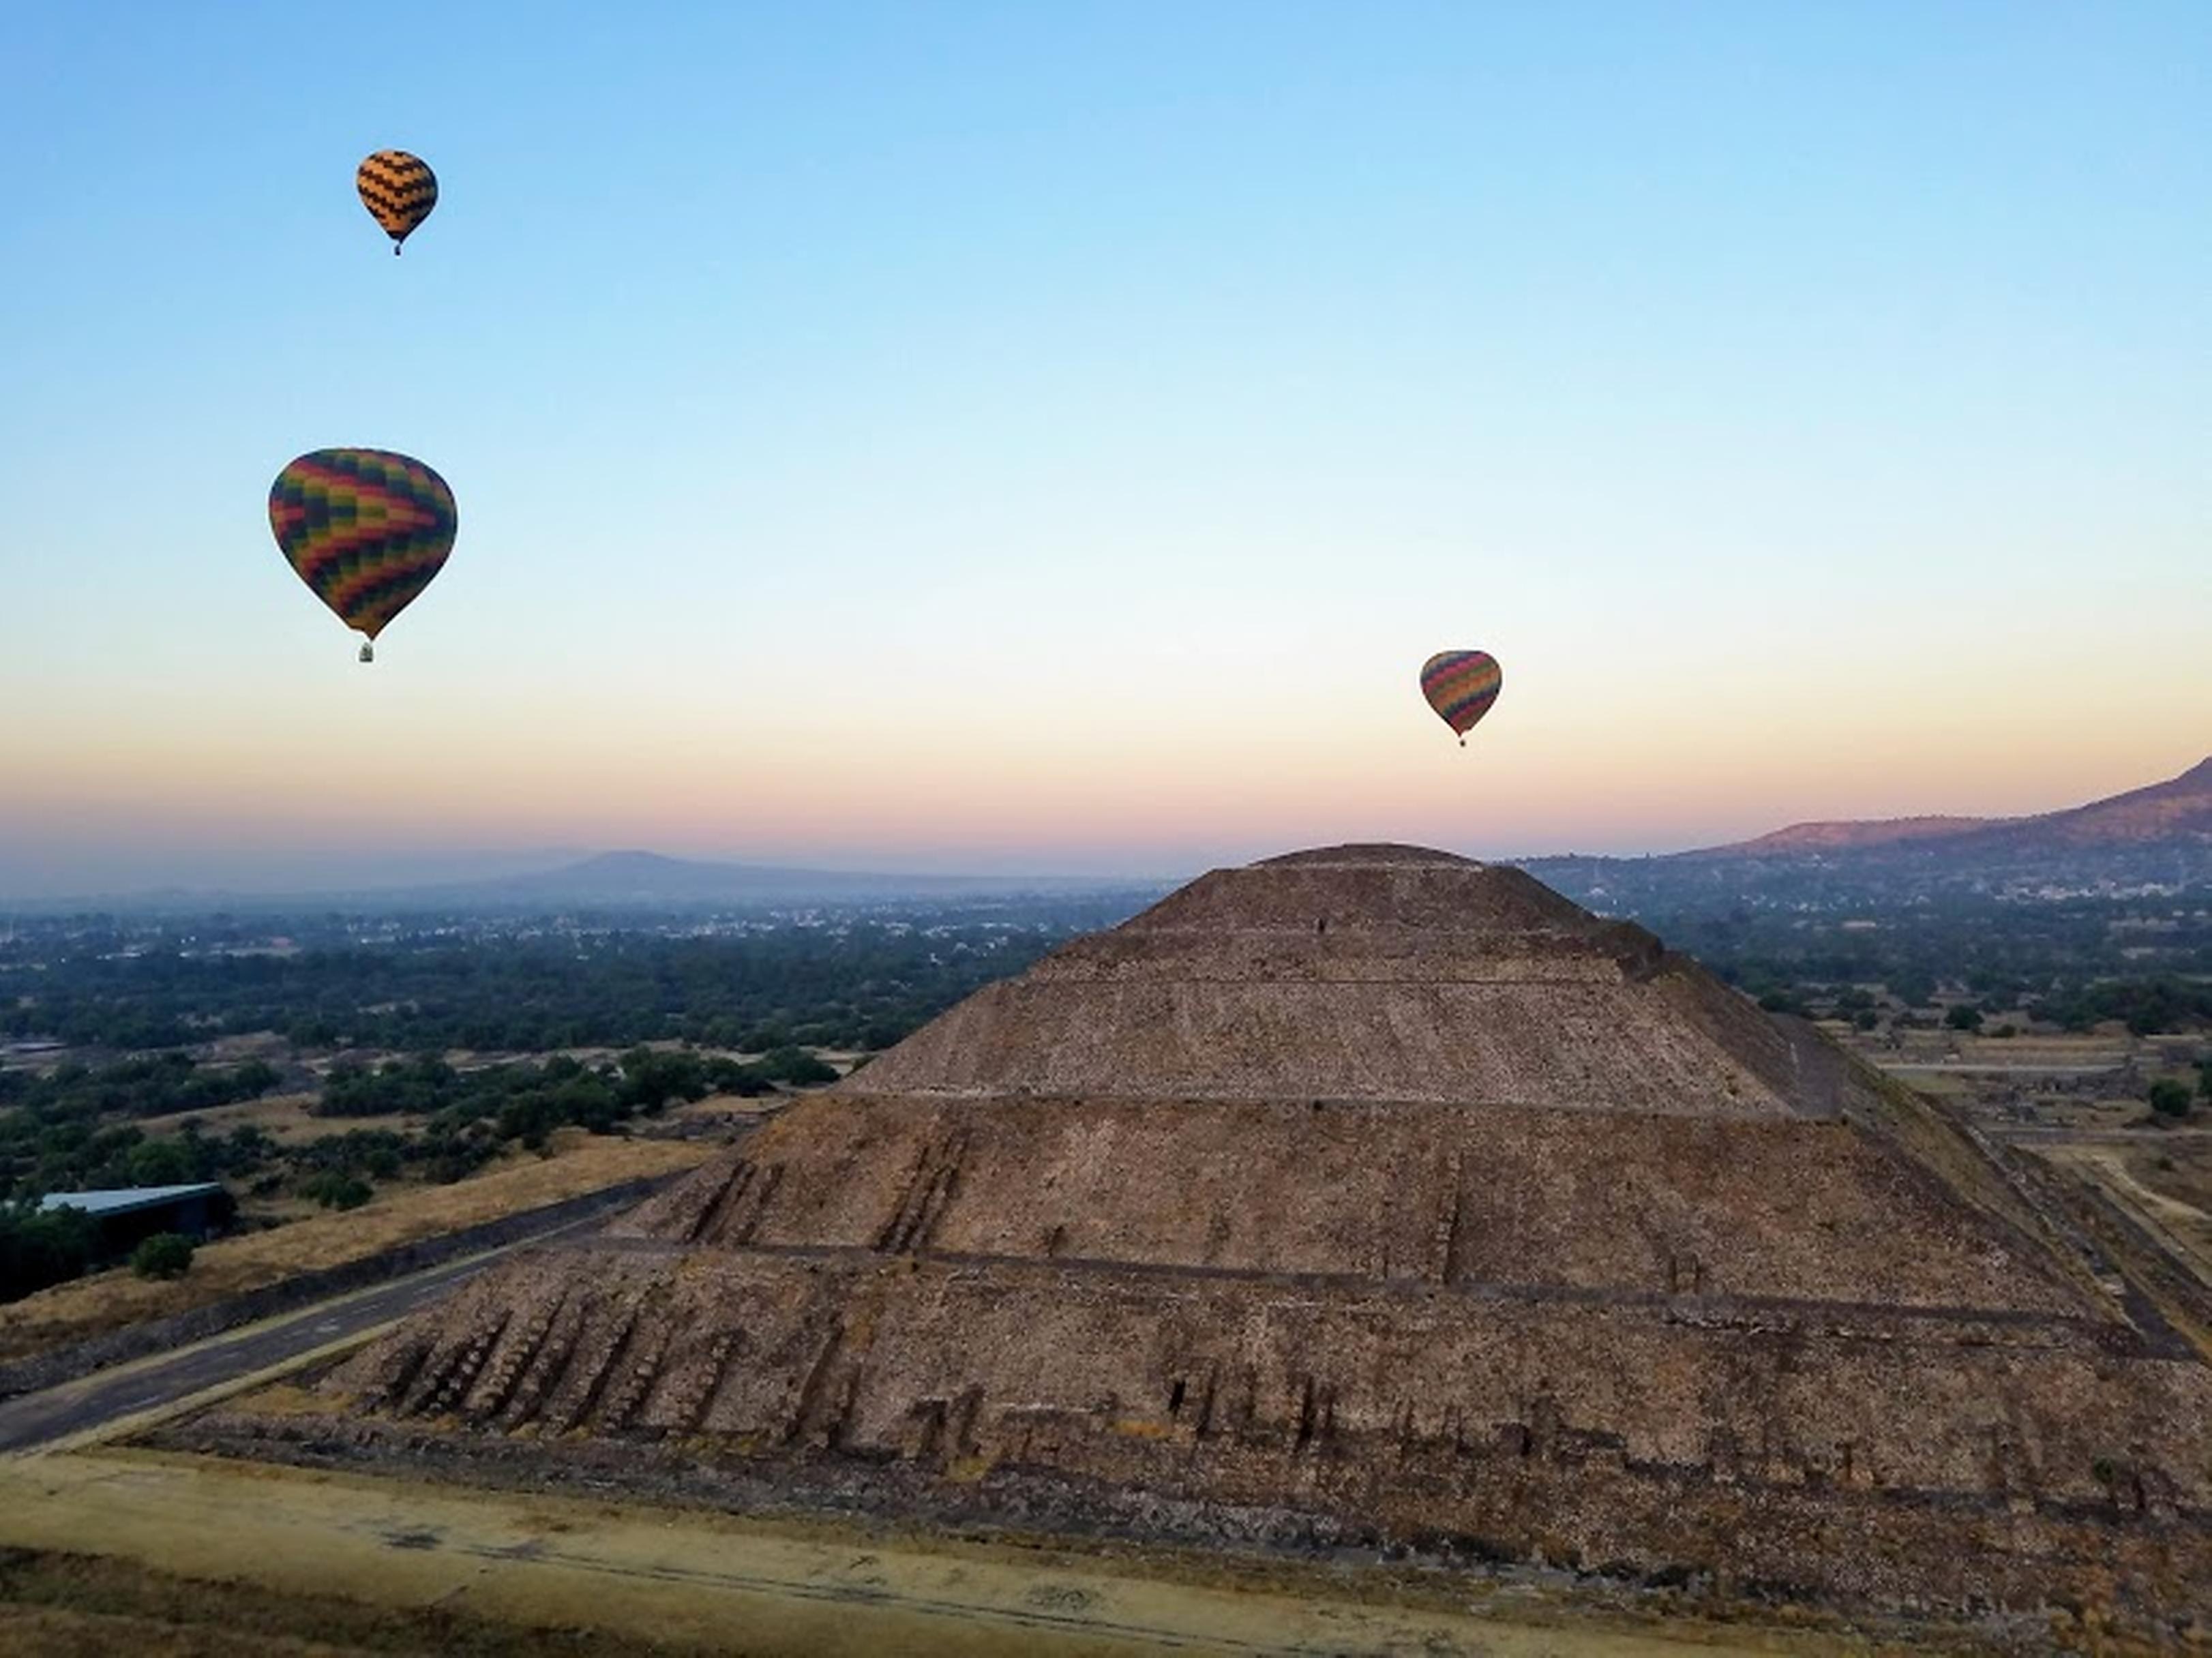 Day 02: Teotihuacan